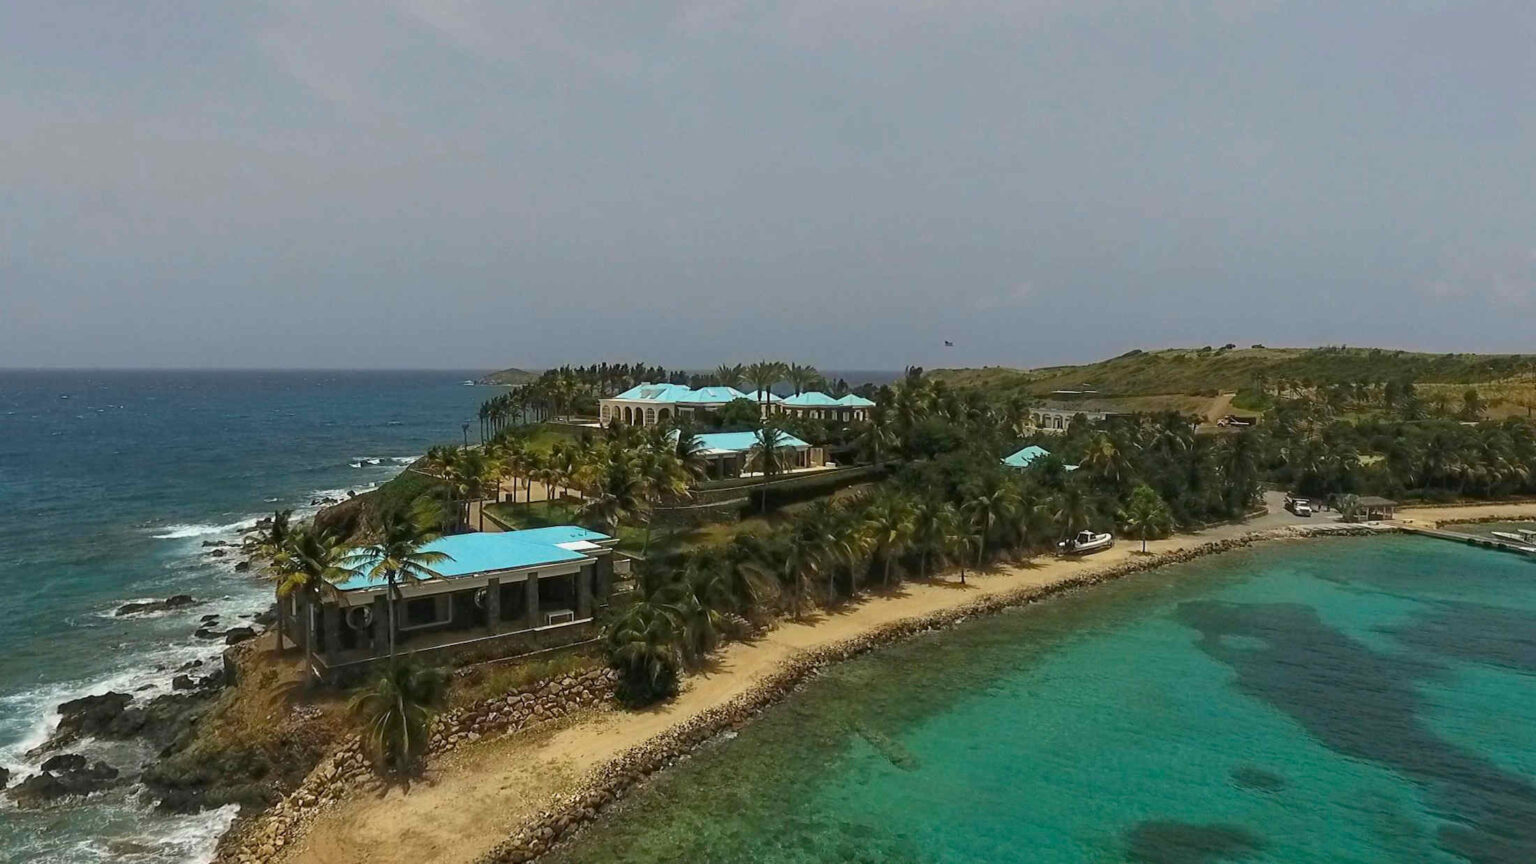 Jeffrey Epstein created a den of sin on his private island. Uncover even more sordid details of Epstein's abuse on his many luxurious properties.